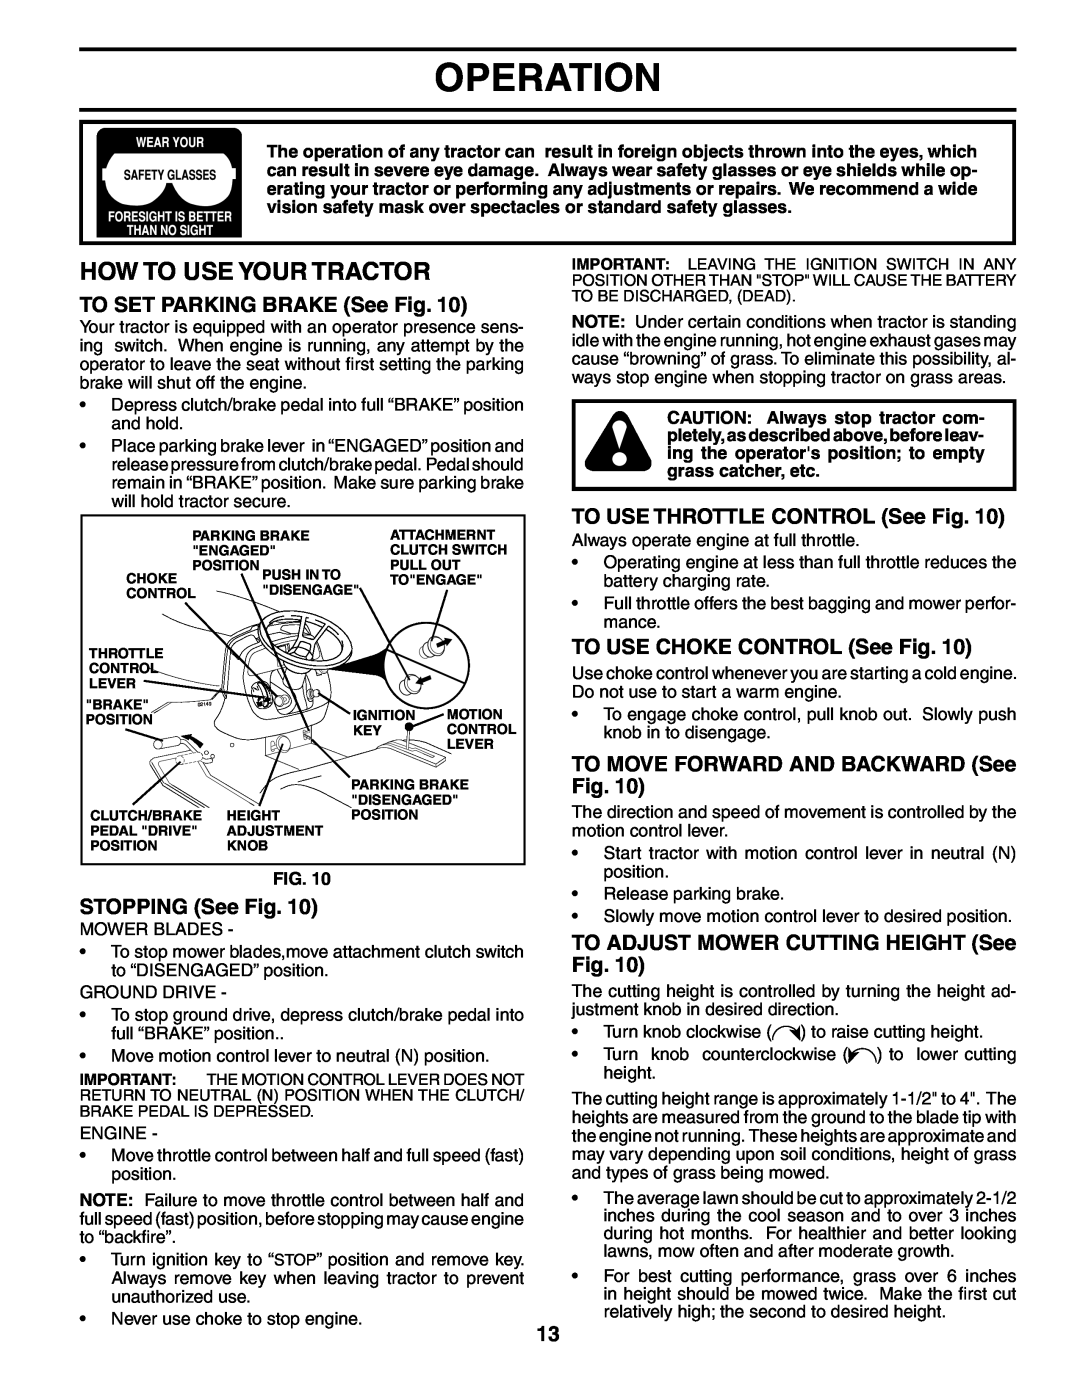 Husqvarna CTH180 XP 02764 owner manual How To Use Your Tractor, TO SET PARKING BRAKE See Fig, STOPPING See Fig, Operation 